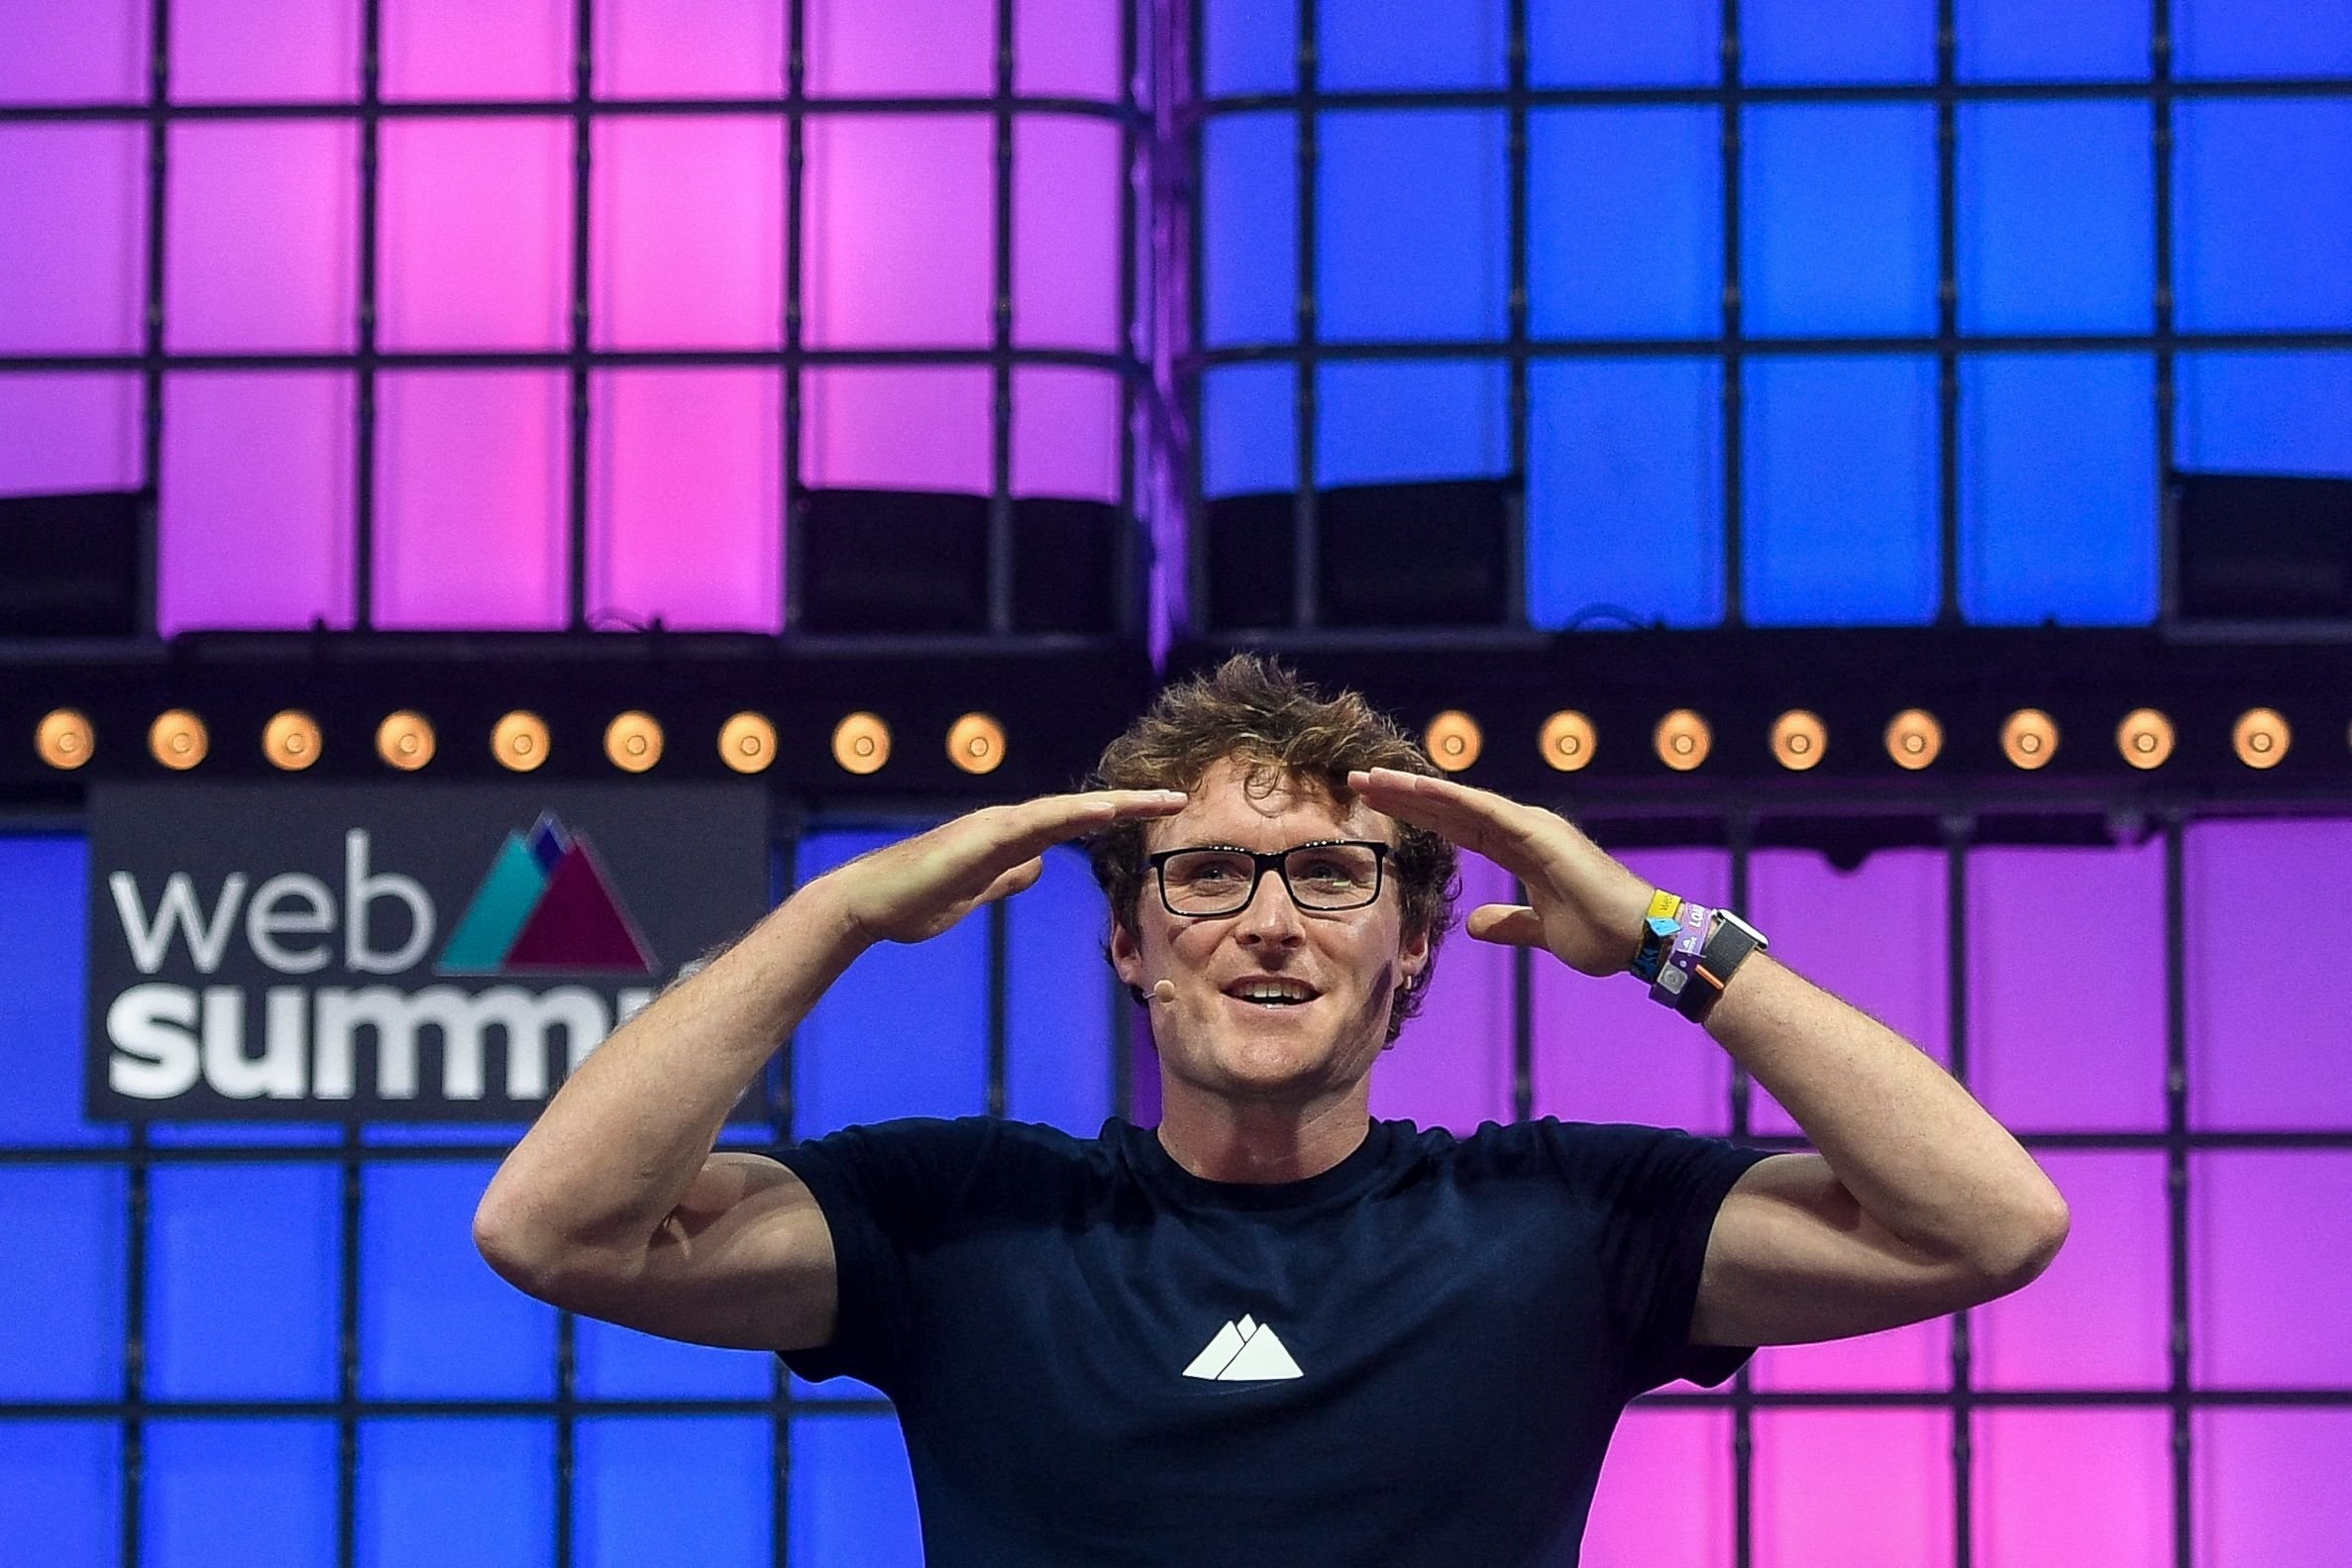 Web Summit founder and CEO Paddy Cosgrave delivers a speech on the opening day of the Web Summit in Lisbon, Portugal, Nov. 1, 2021. (AFP Photo)